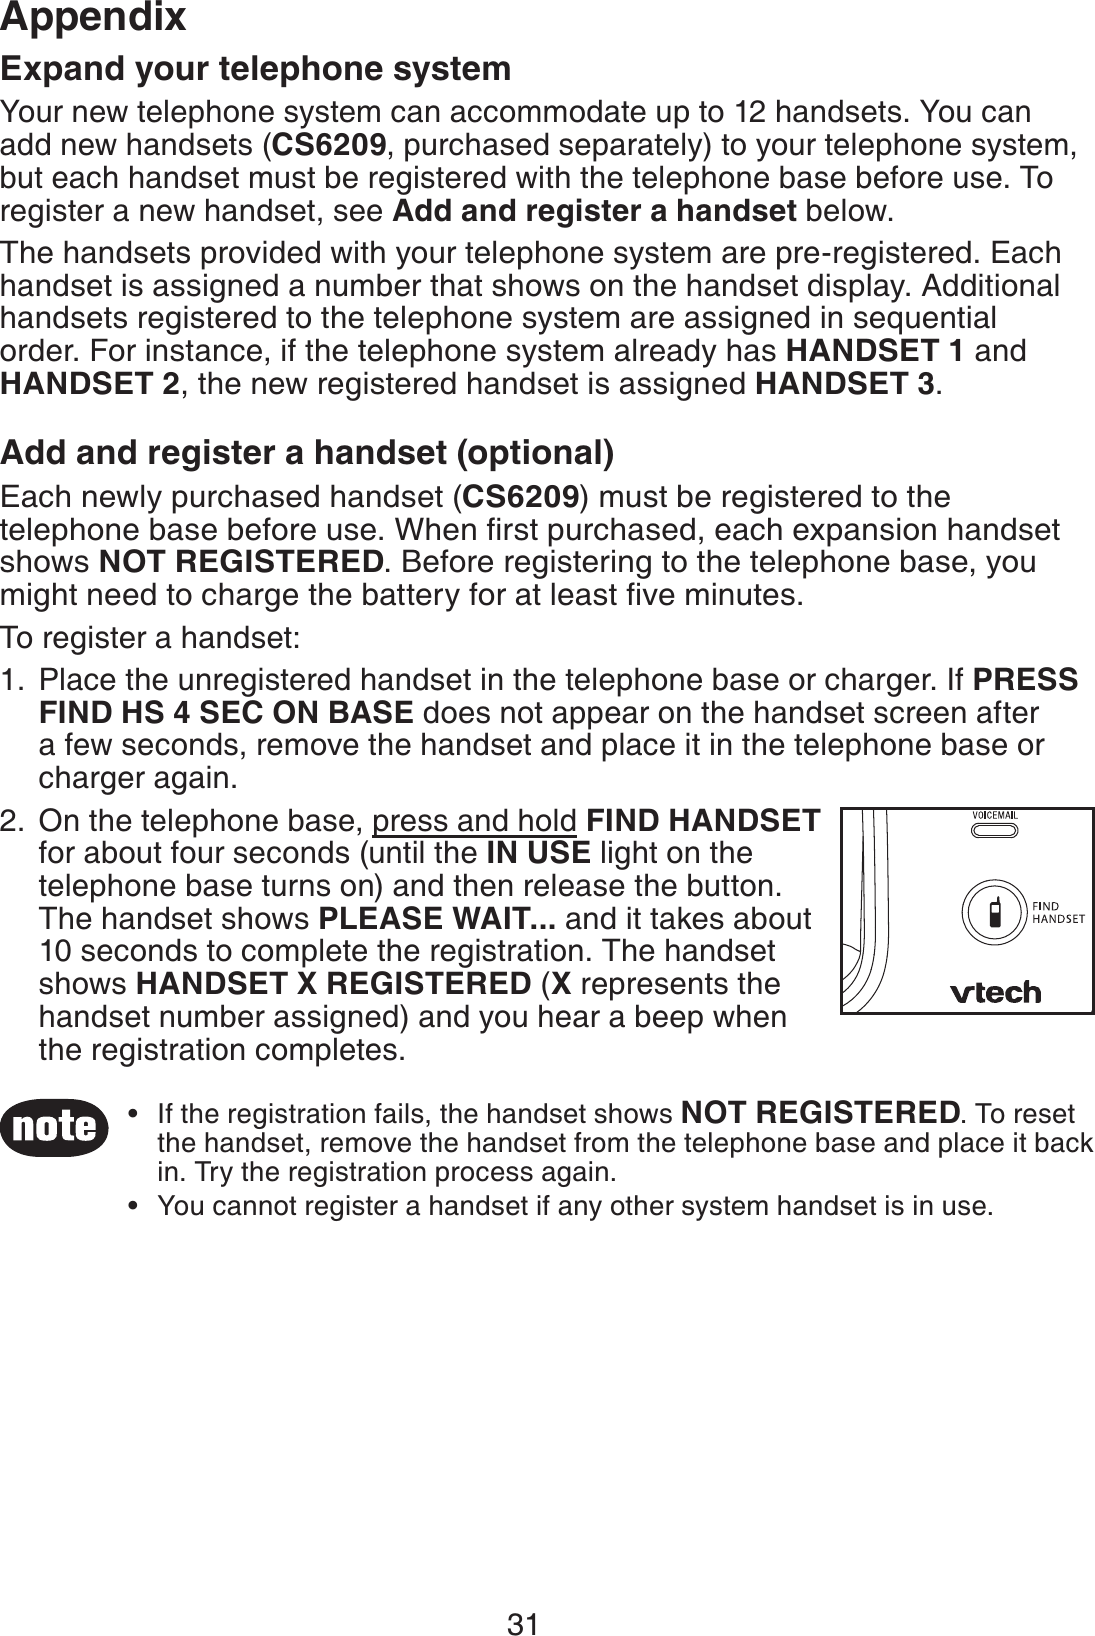 31AppendixExpand your telephone systemYour new telephone system can accommodate up to 12 handsets. You can add new handsets (CS6209, purchased separately) to your telephone system, but each handset must be registered with the telephone base before use. To register a new handset, see Add and register a handset below.The handsets provided with your telephone system are pre-registered. Each handset is assigned a number that shows on the handset display. Additional handsets registered to the telephone system are assigned in sequential order. For instance, if the telephone system already has HANDSET 1 and HANDSET 2, the new registered handset is assigned HANDSET 3.Add and register a handset (optional)Each newly purchased handset (CS6209) must be registered to the telephone base before use. When ﬁrst purchased, each expansion handset shows NOT REGISTERED. Before registering to the telephone base, you might need to charge the battery for at least ﬁve minutes.To register a handset:Place the unregistered handset in the telephone base or charger. If PRESS FIND HS 4 SEC ON BASE does not appear on the handset screen after a few seconds, remove the handset and place it in the telephone base or charger again.On the telephone base, press and hold FIND HANDSET for about four seconds (until the IN USE light on the telephone base turns on) and then release the button. The handset shows PLEASE WAIT... and it takes about 10 seconds to complete the registration. The handset shows HANDSET X REGISTERED (X represents the handset number assigned) and you hear a beep when the registration completes.1.2.If the registration fails, the handset shows NOT REGISTERED. To reset the handset, remove the handset from the telephone base and place it back in. Try the registration process again.You cannot register a handset if any other system handset is in use.••